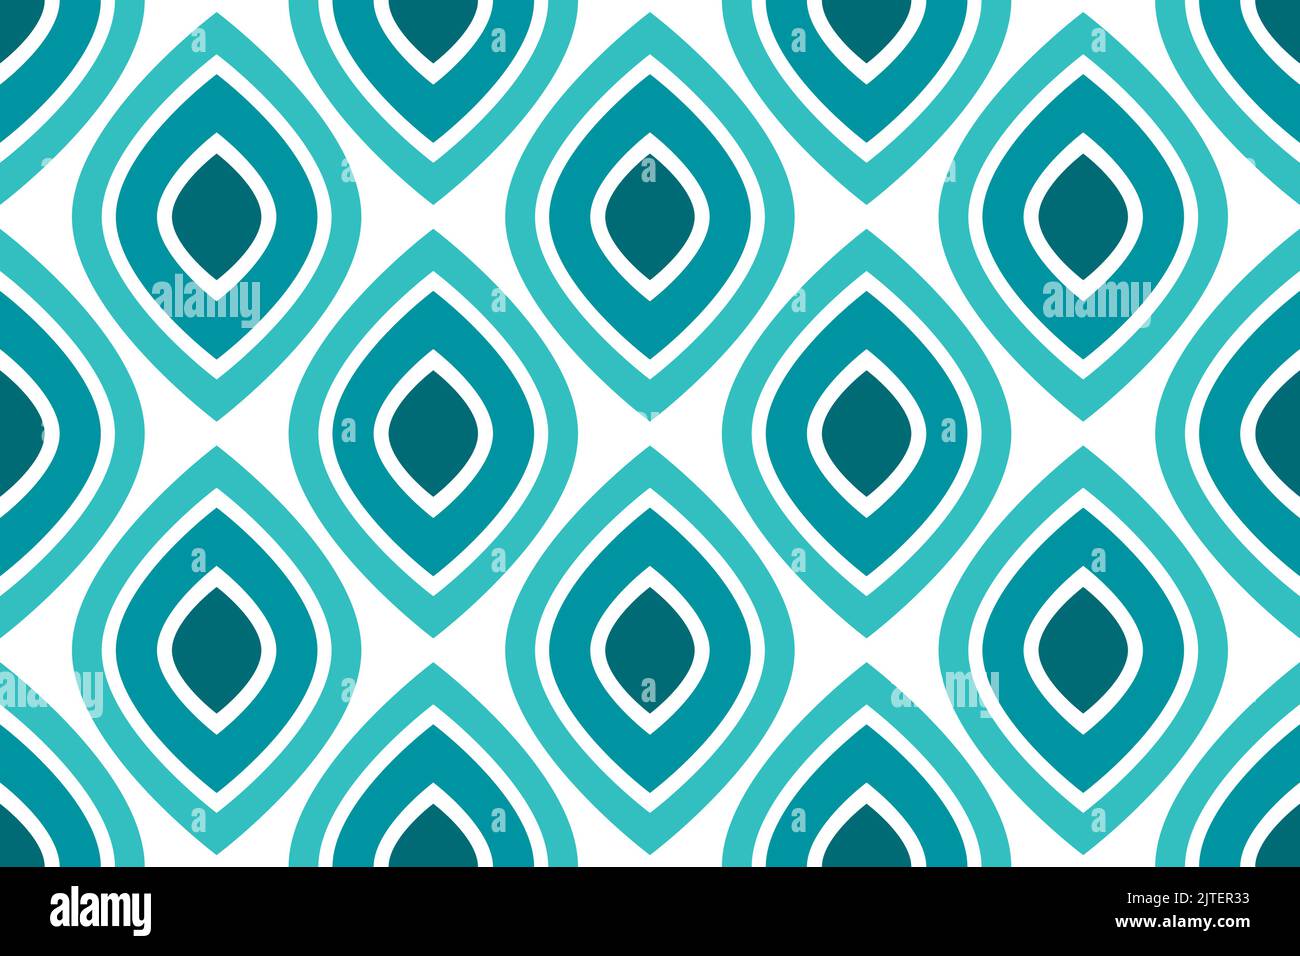 Abstract eye shapes blue seamless pattern. Vector illustration. Stock Vector